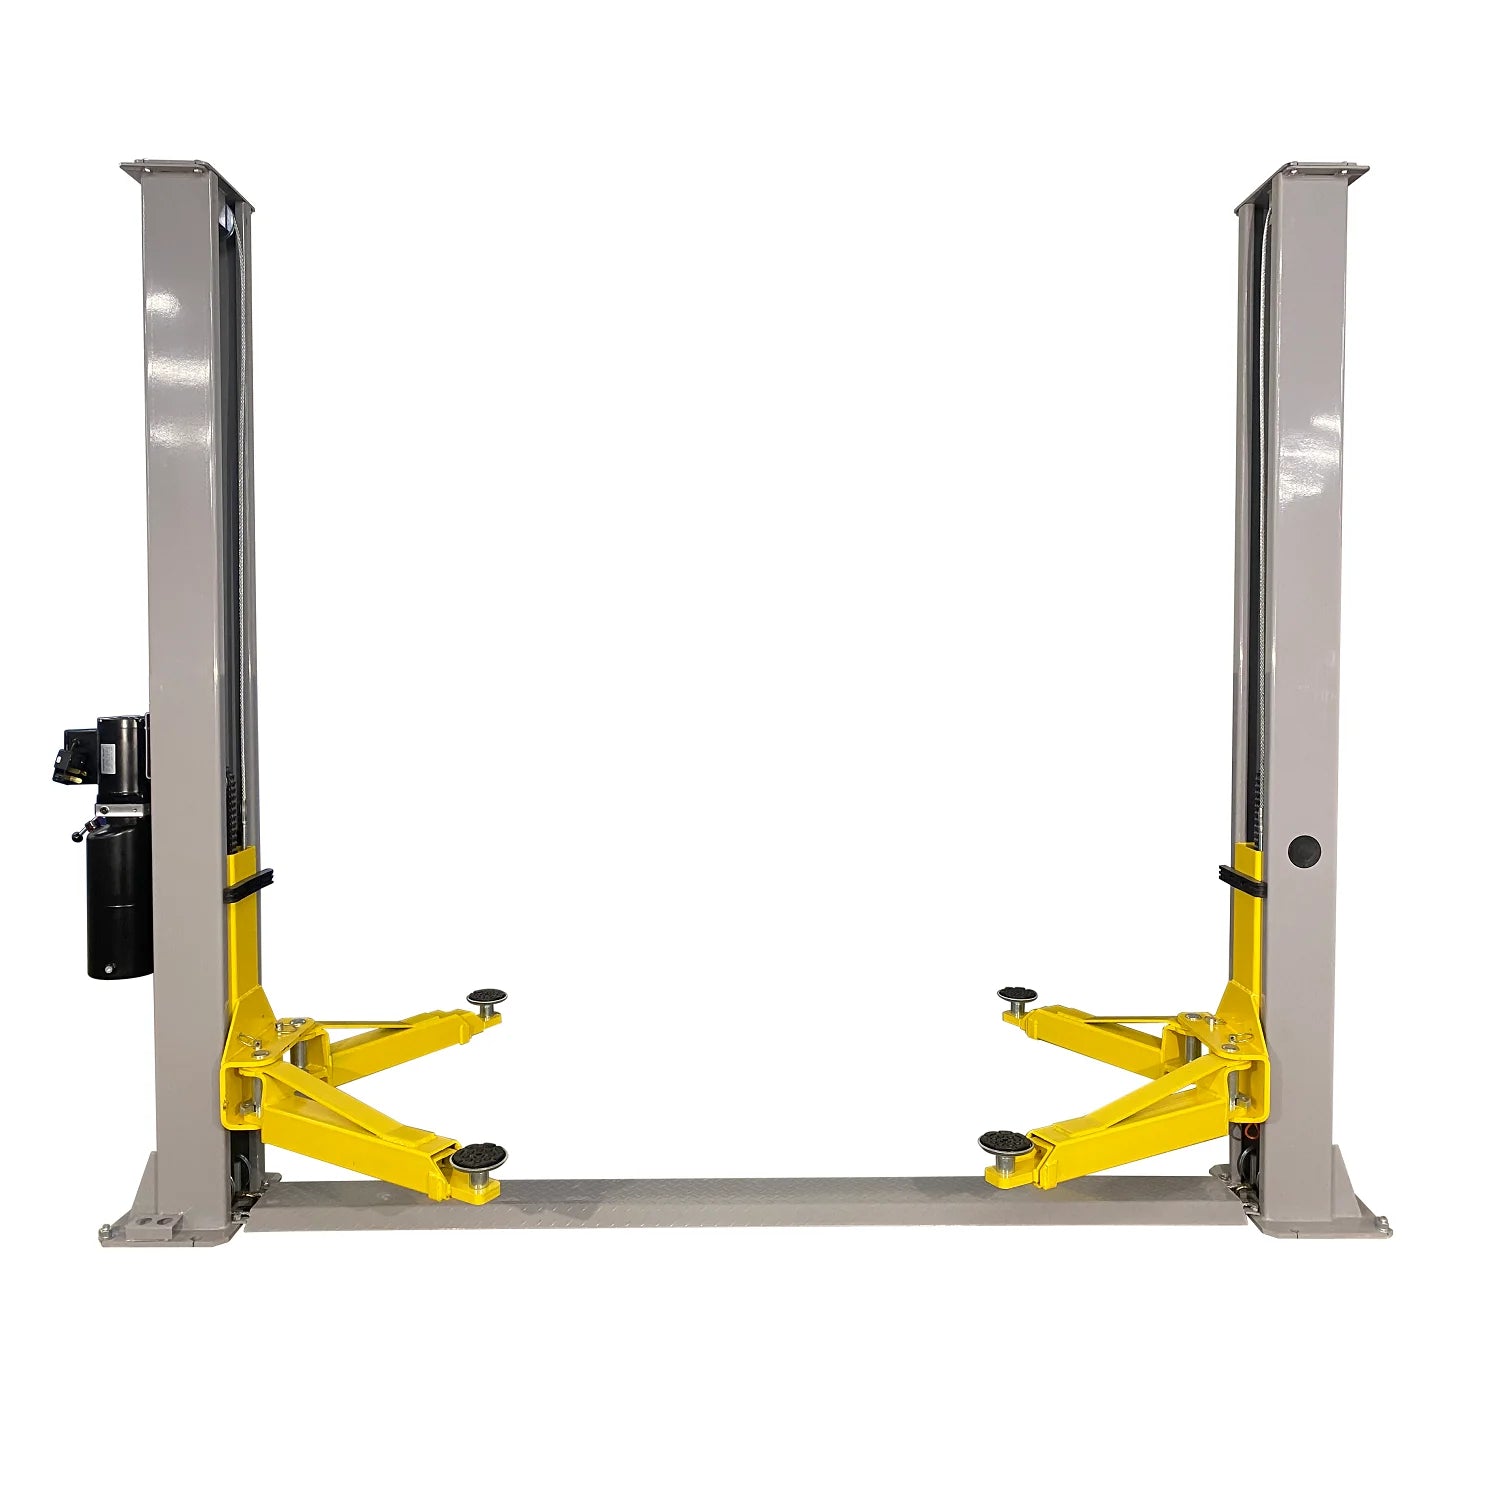 Triumph NT-9 Baseplate 2 Post Auto Lift, 3-Stage Arms, 9000-Lb Capacity